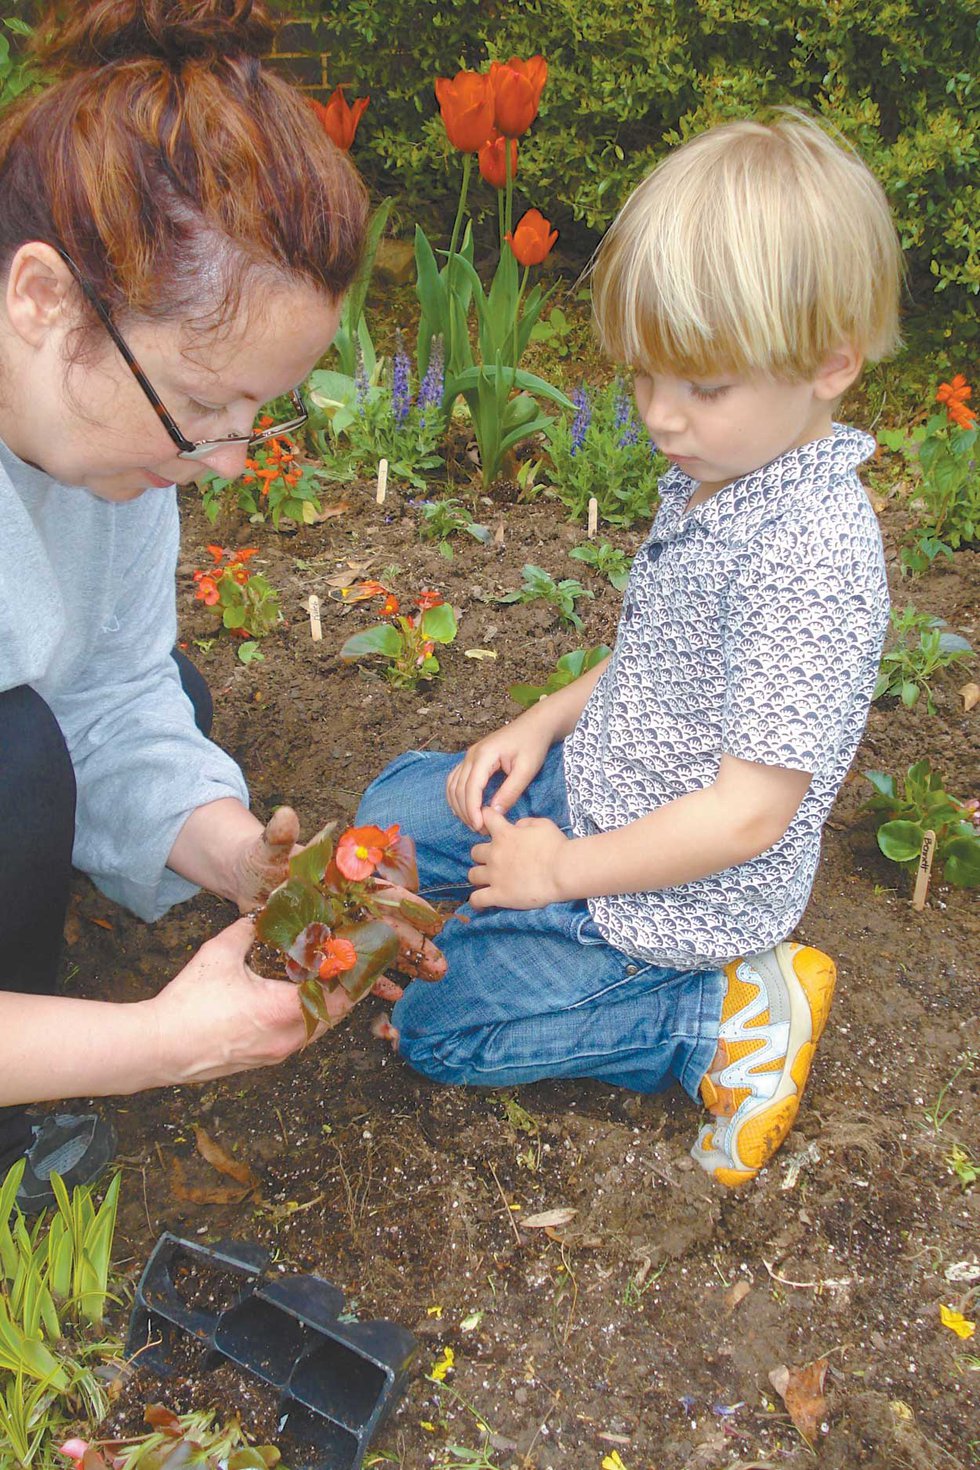 Preschooler learns about planting